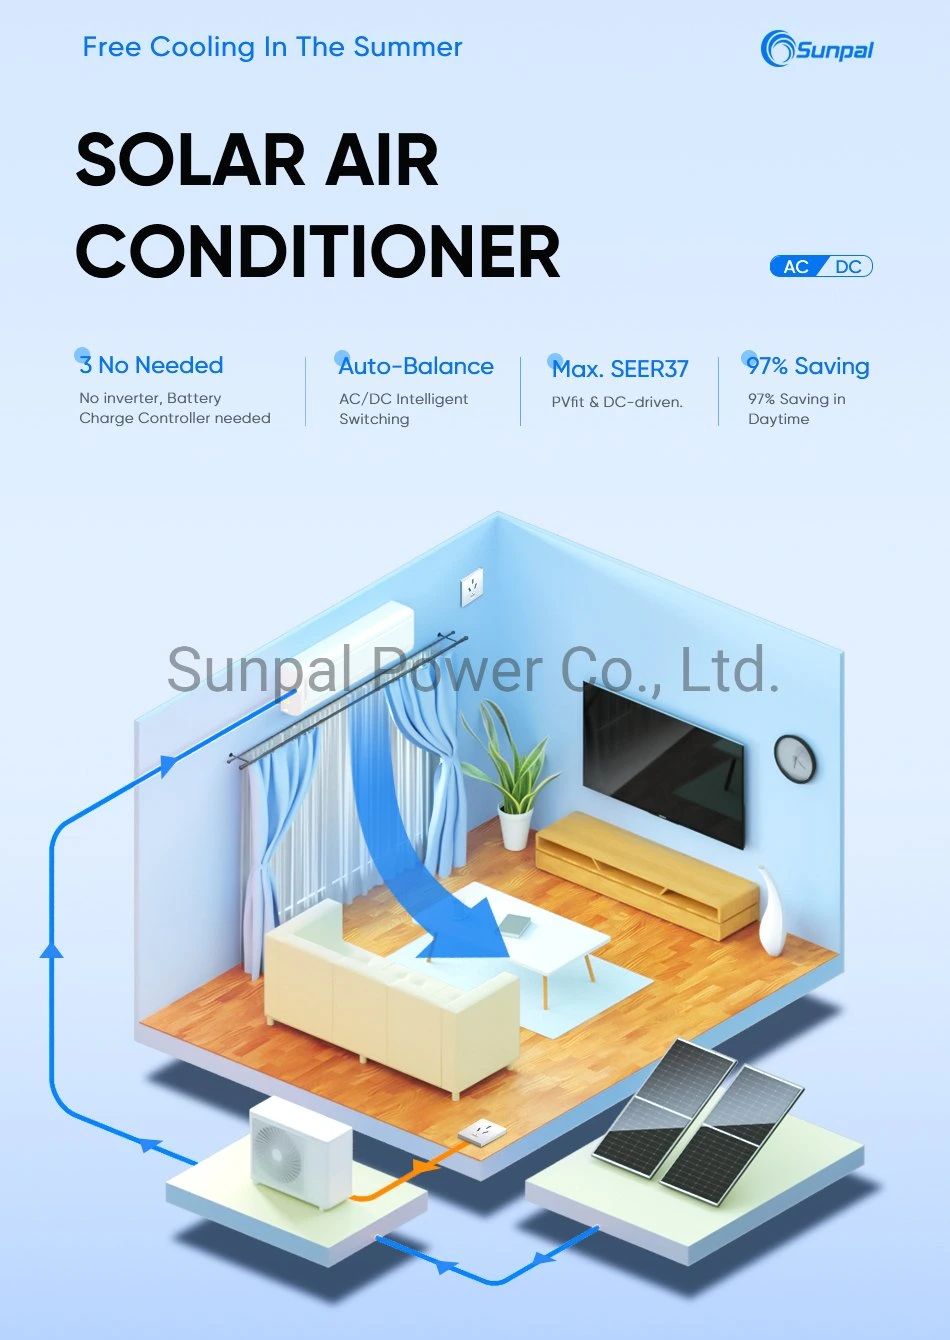 Sunpal Solar Air Conditioner Acdc Hybrid Solar Panel Powered Inverter PV Direct Renewable Energy Air Conditioning System